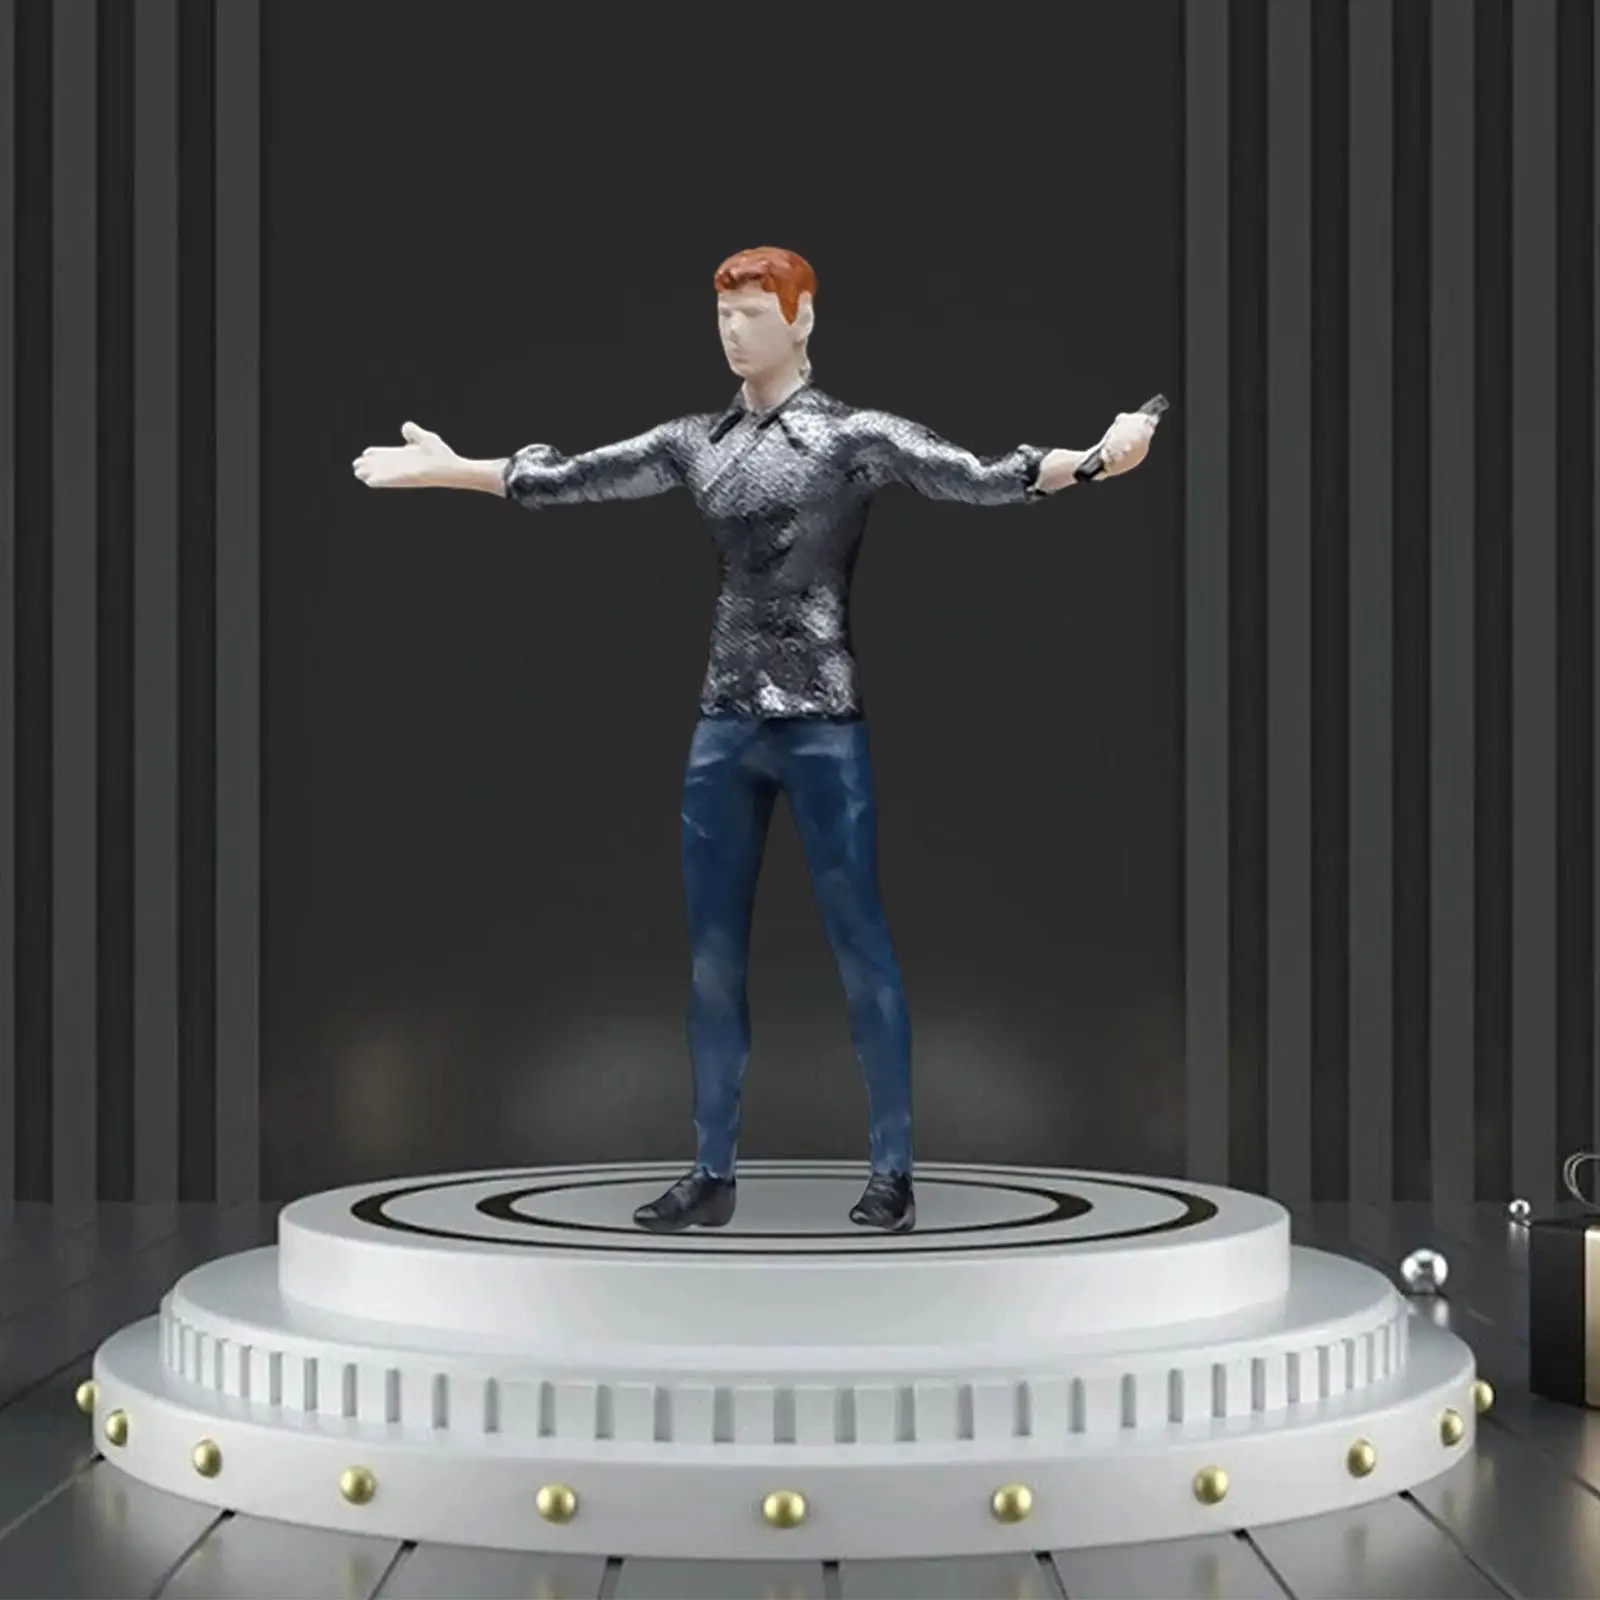 1/64 Male Singer Figures Tiny People Model Model Trains People Figures for DIY Scene Diorama Photography Props Layout Decoration